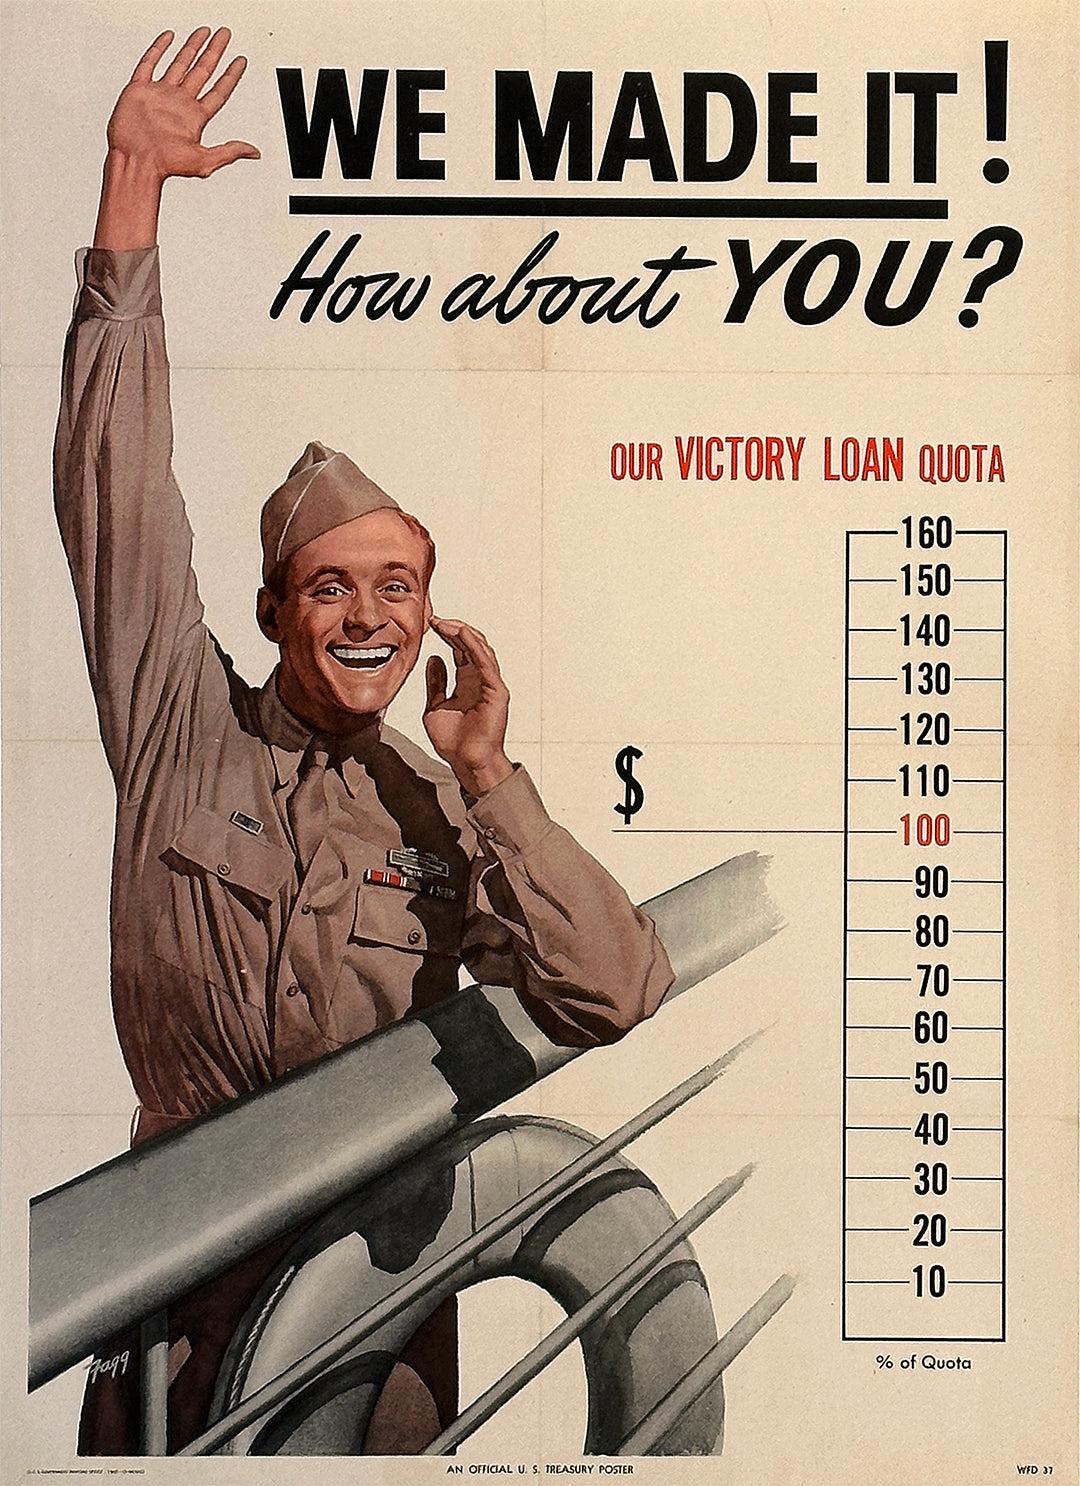 Original Vintage WWII Poster We Made It by Fagg Victory Loan 1945